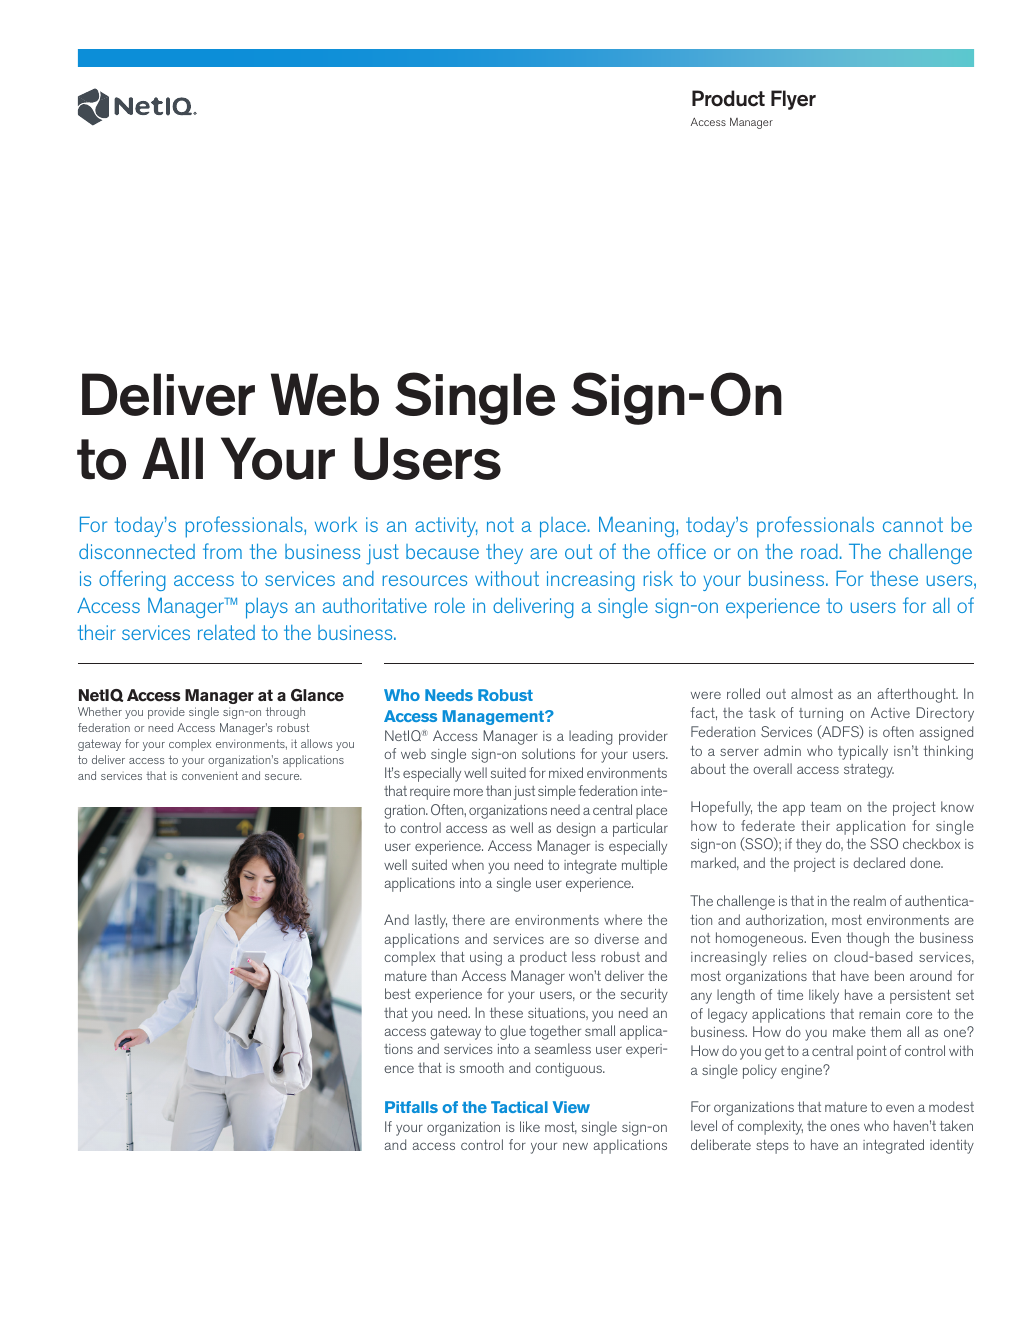 Product Flyer Deliver Web Single Sign On To All Your Users